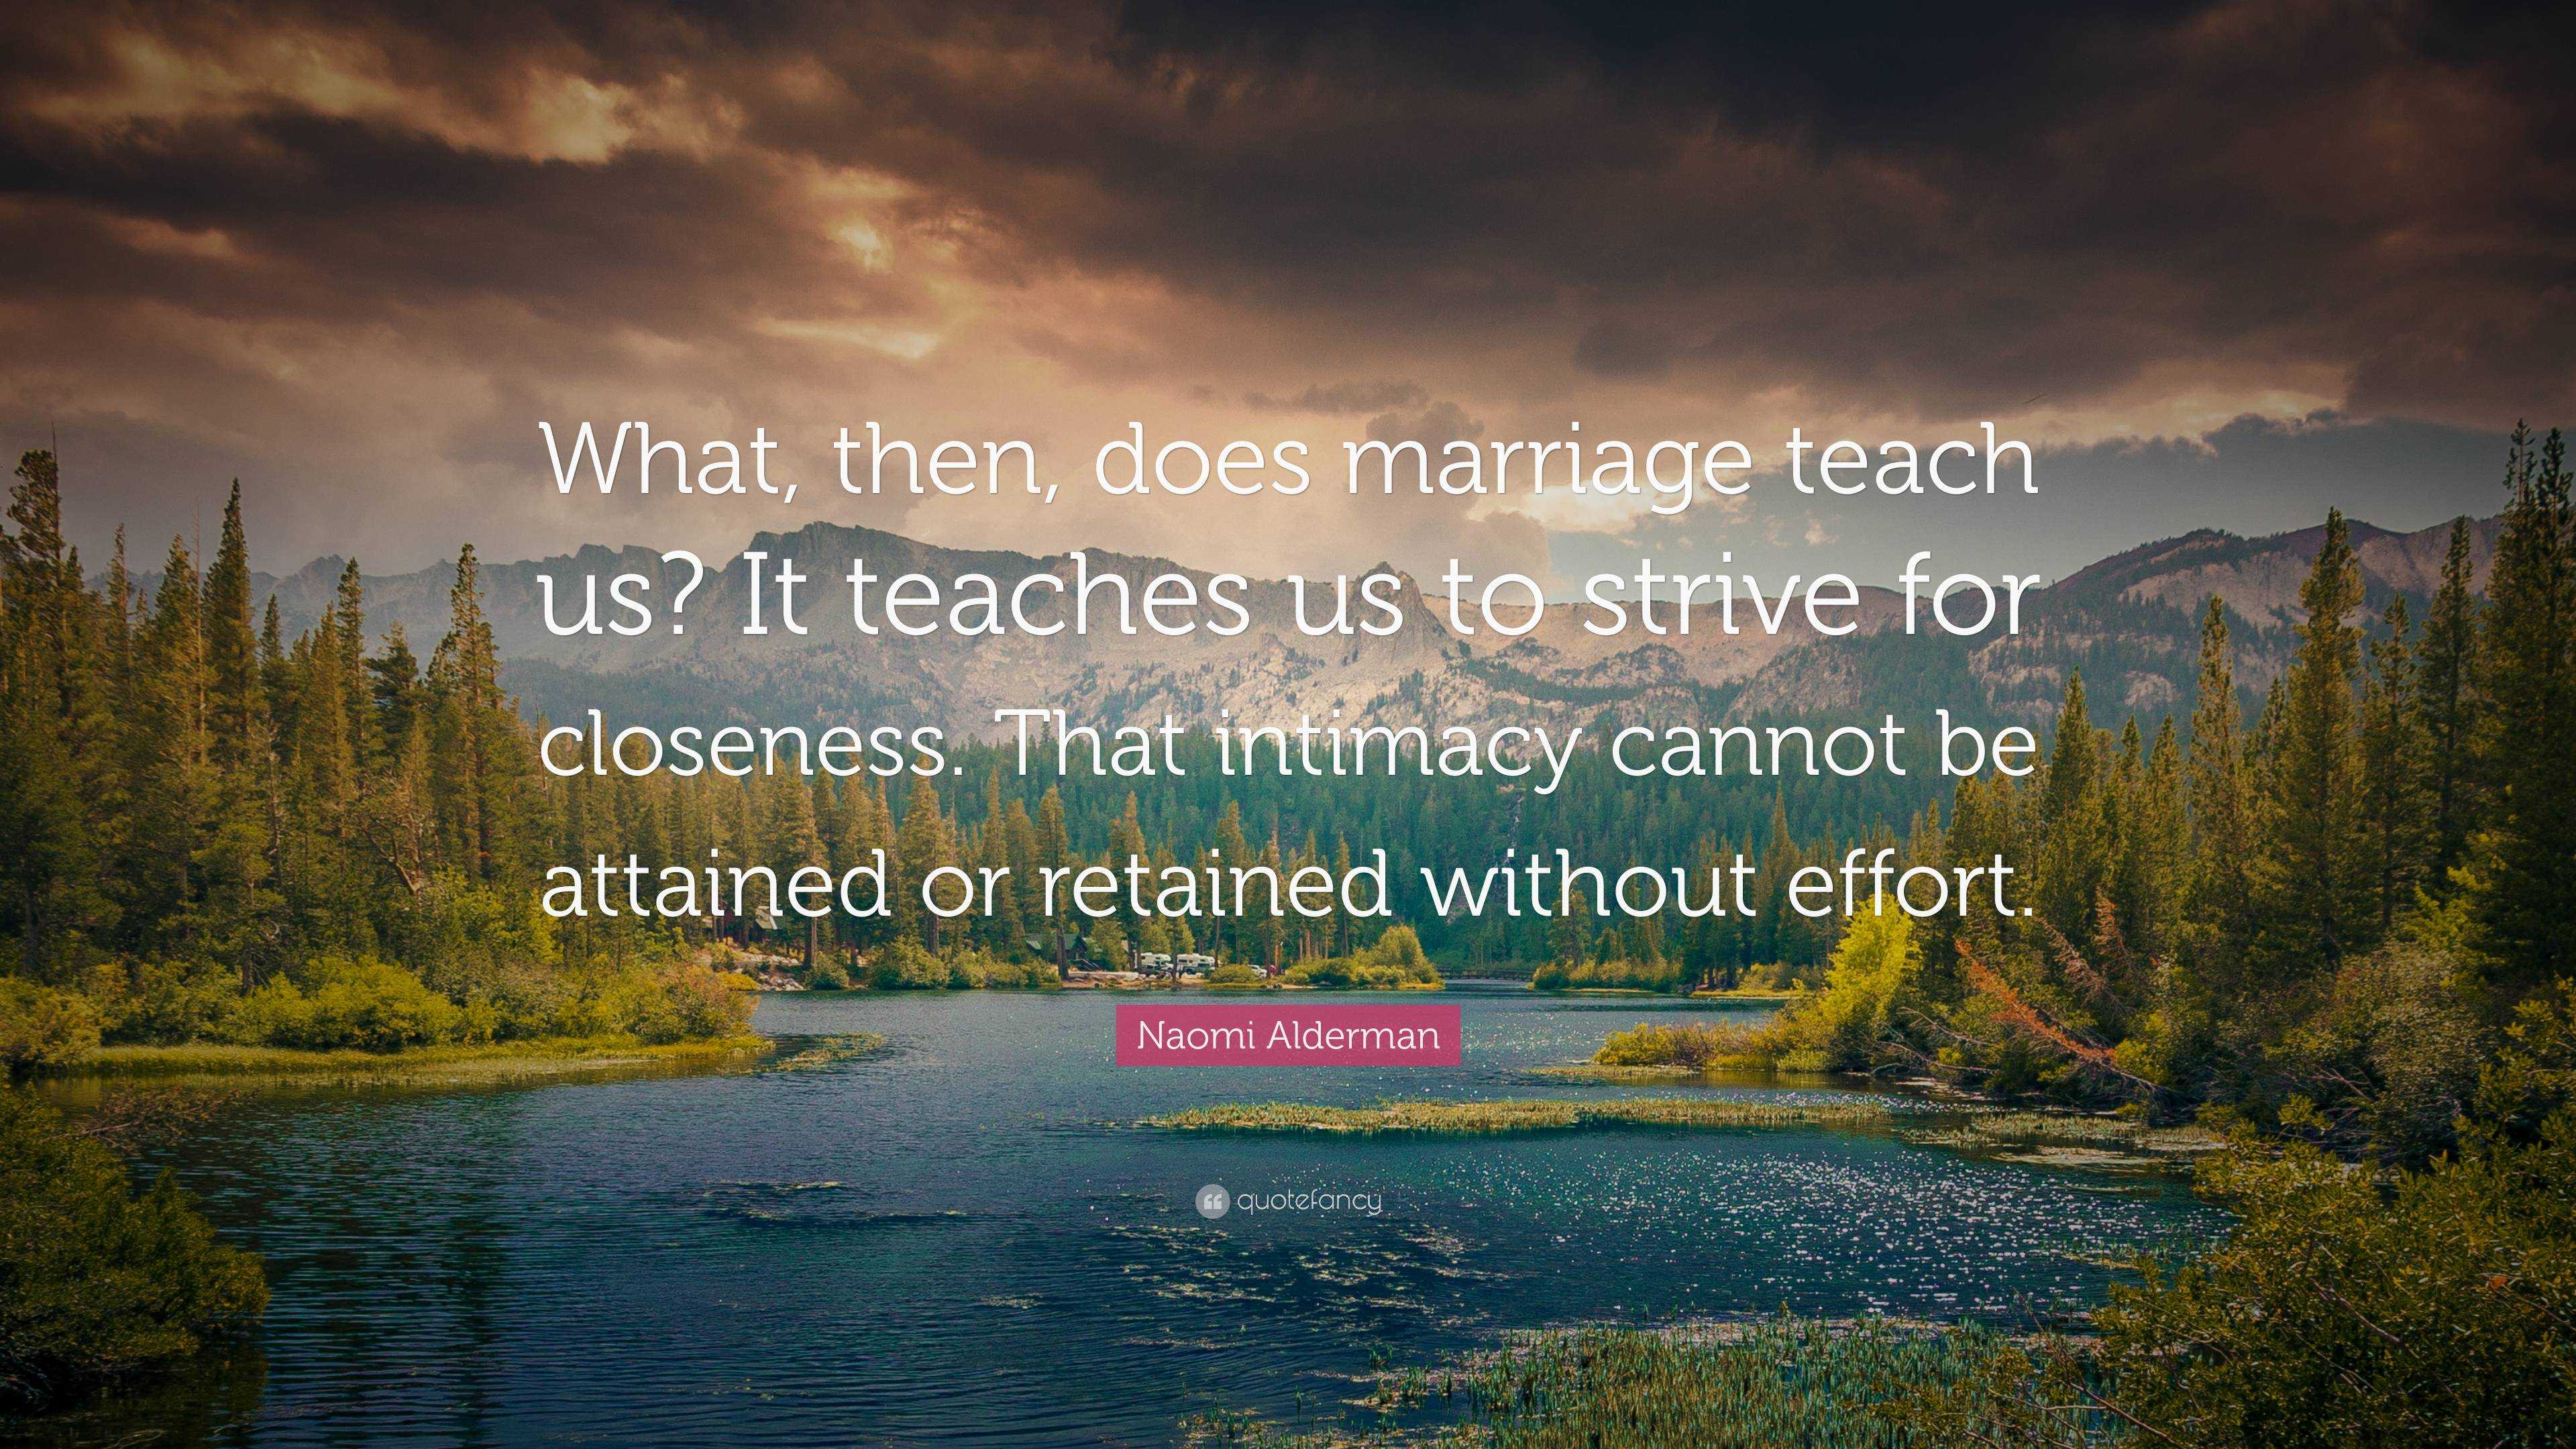 What is a marriage without intimacy